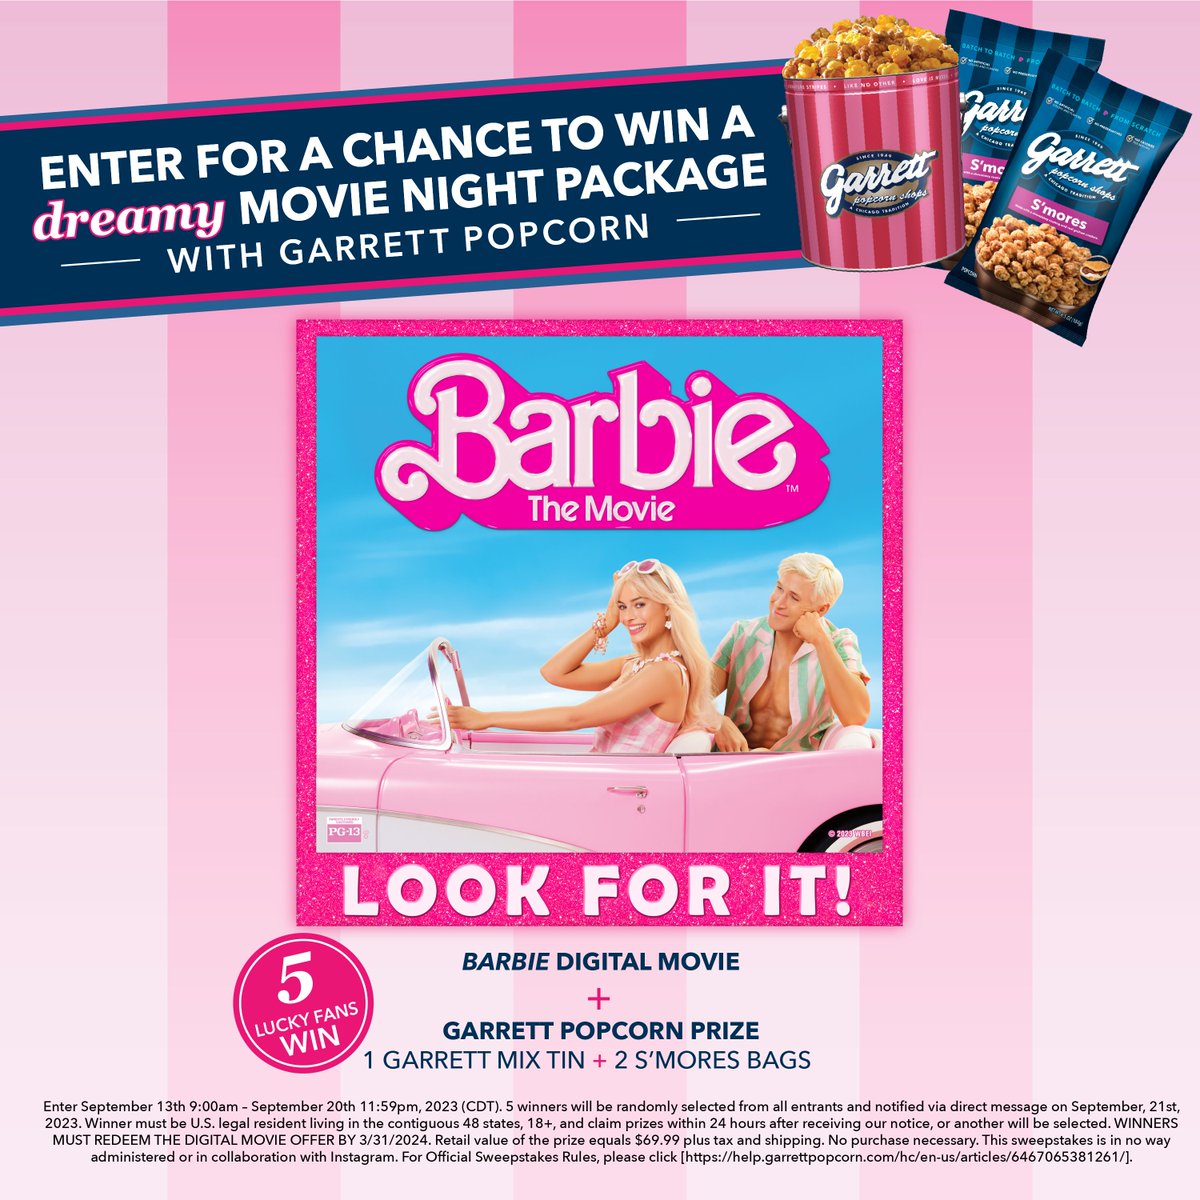 Last chance to enter to win! 💖 A SWEEPSTAKES for popcorn and @BarbieTheMovie 💖 Enter for a chance to win a dreamy movie night package with the Barbie digital movie and Garrett Popcorn! 🎉 Head over to @garrettpopcorn on Instagram for your chance to win: bit.ly/3Ps0Zbb